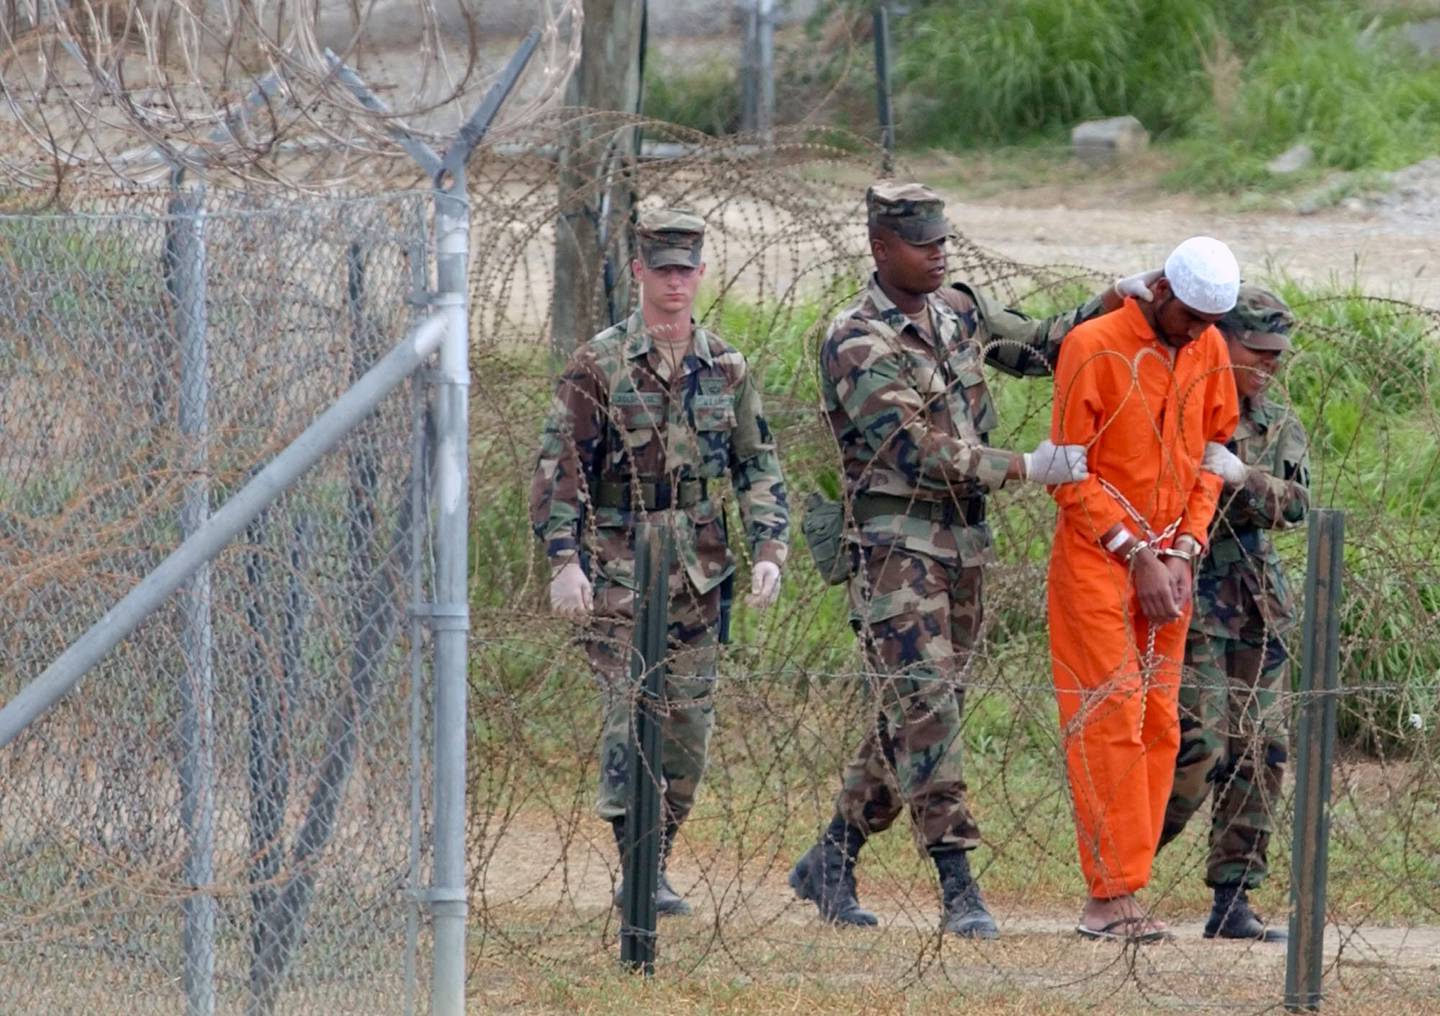 A 2002 file photo showing a detainee at the now-closed Camp X-Ray in Guantanamo Bay. AP